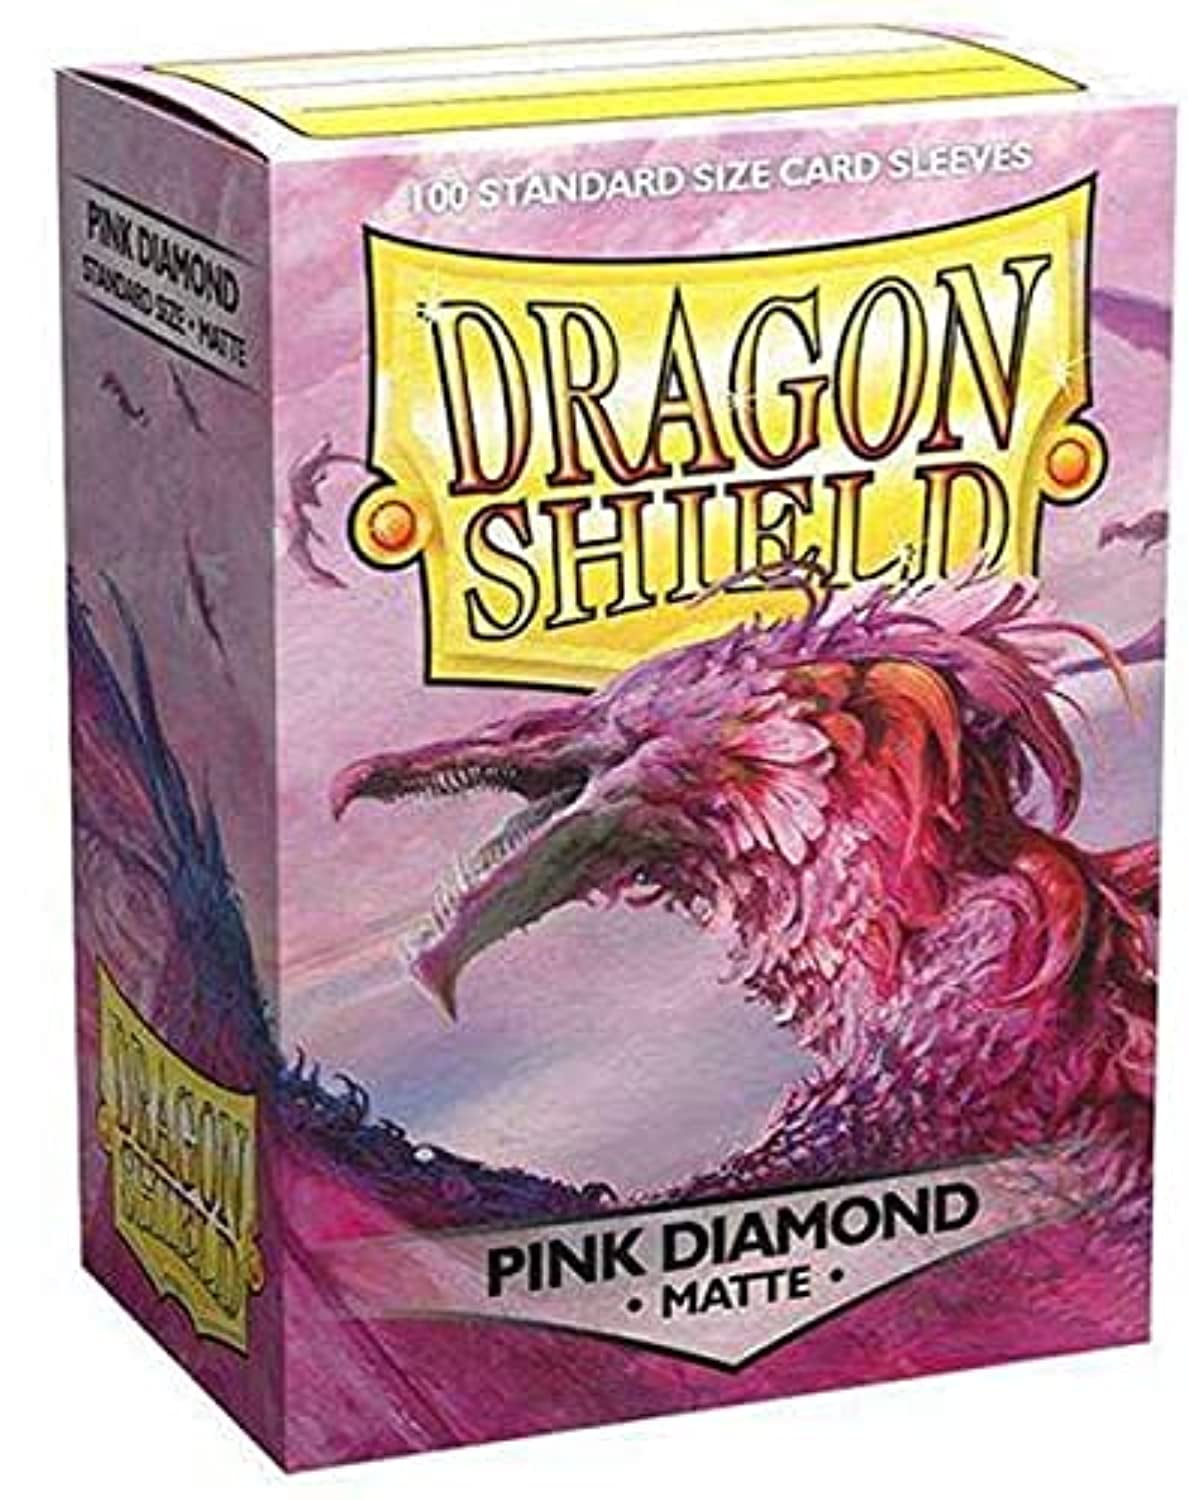 Dragon Shield Japanese Size Matte Purple 60ct Card Protector Sleeves Atm11109 for sale online 